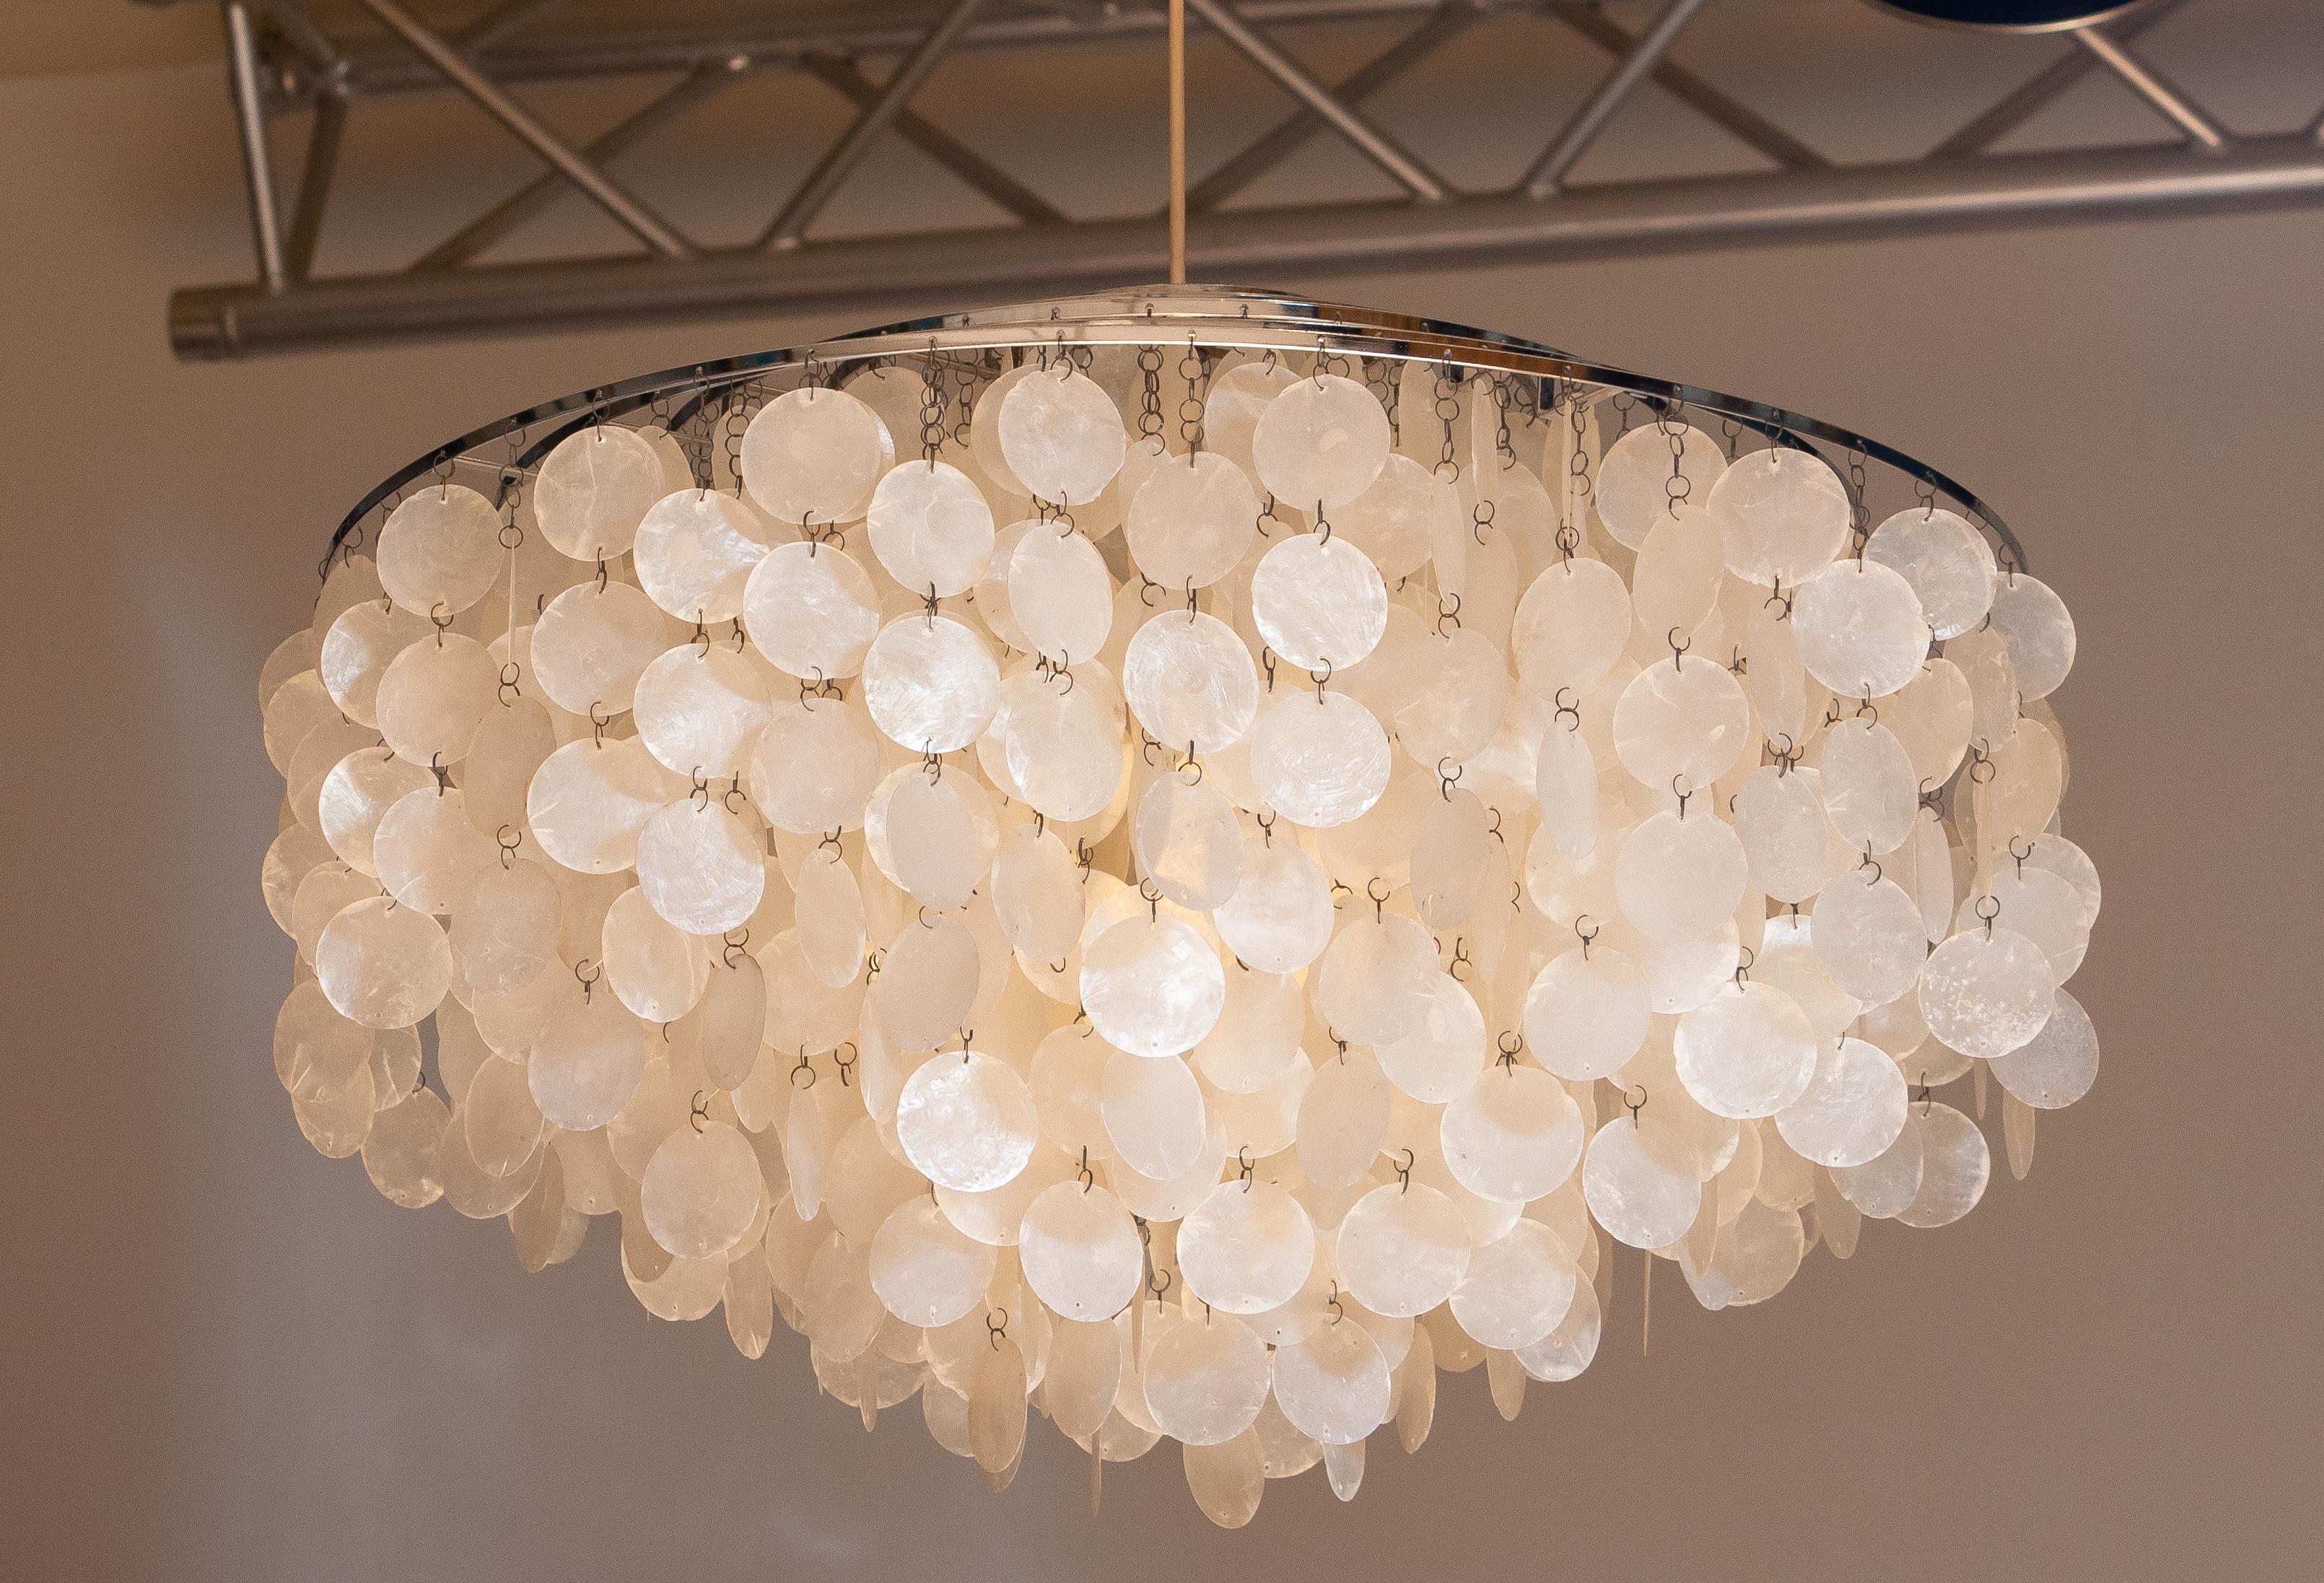 Beautiful and complete original XL Capiz shell chandelier designed by Verner Panton for J. Luber AG in Switzerland 1964.
This extra large chandelier measures a diameter of 70cm. or 27,56